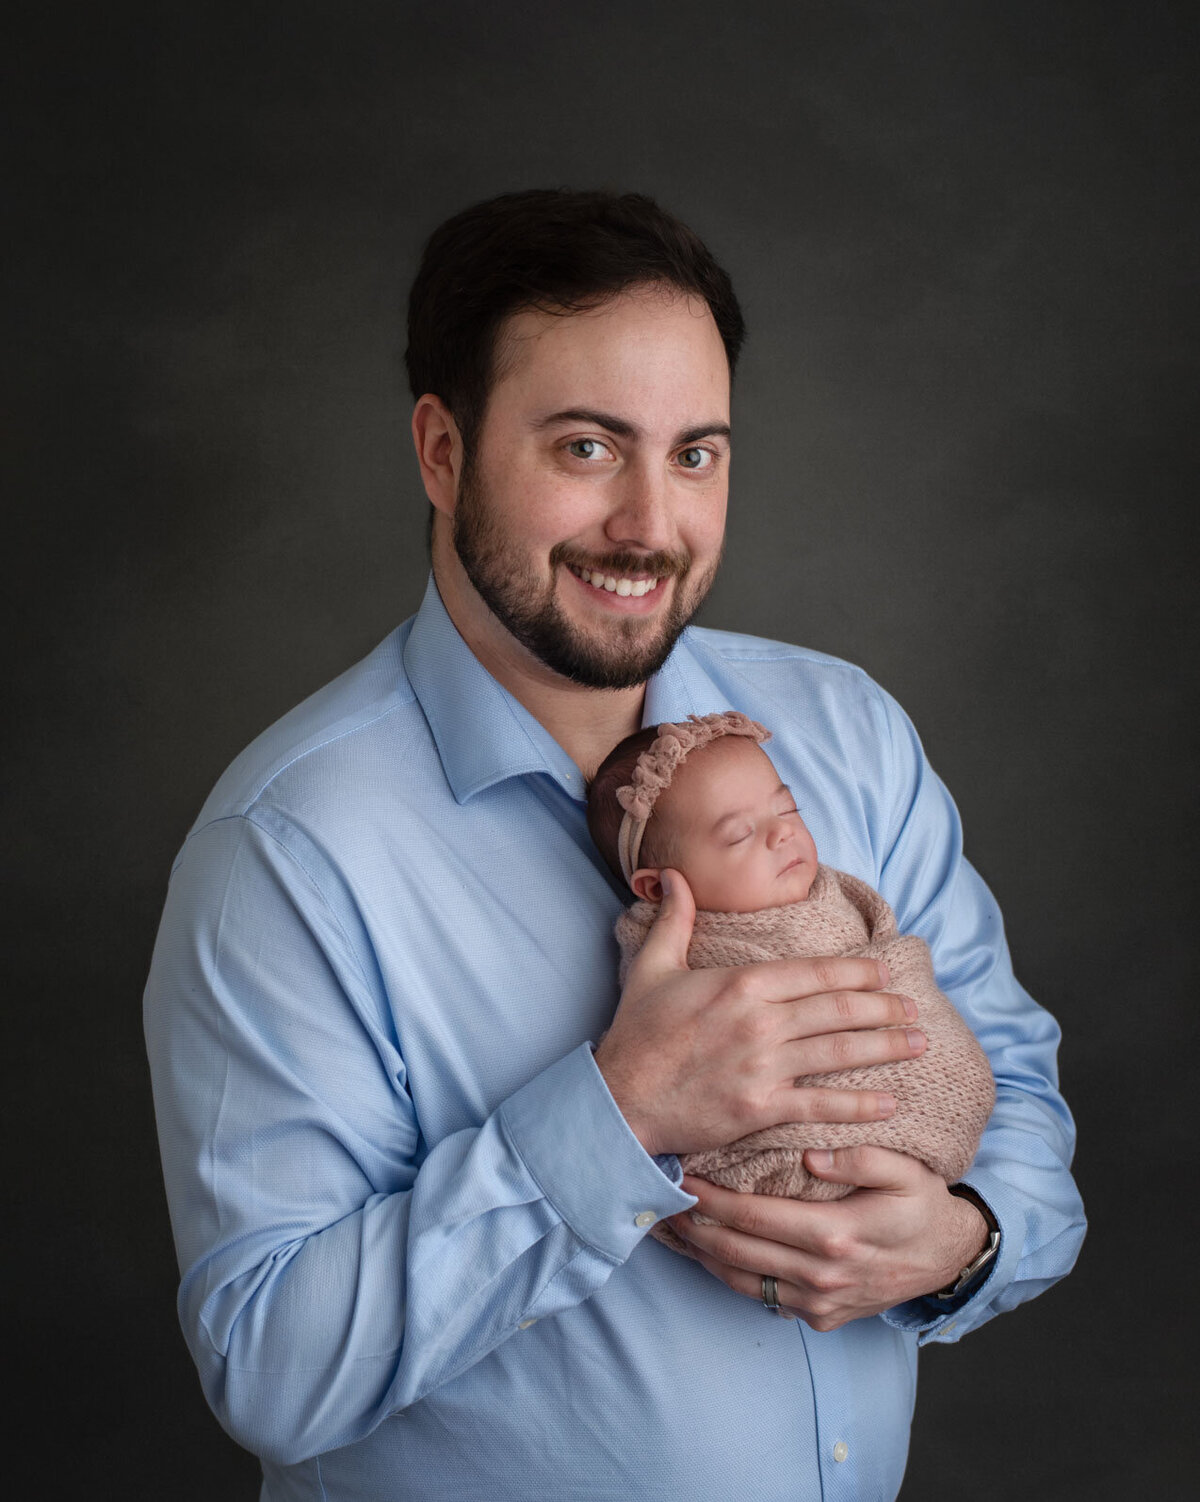 Dad looking at camera and smiling while holding newborn in pink